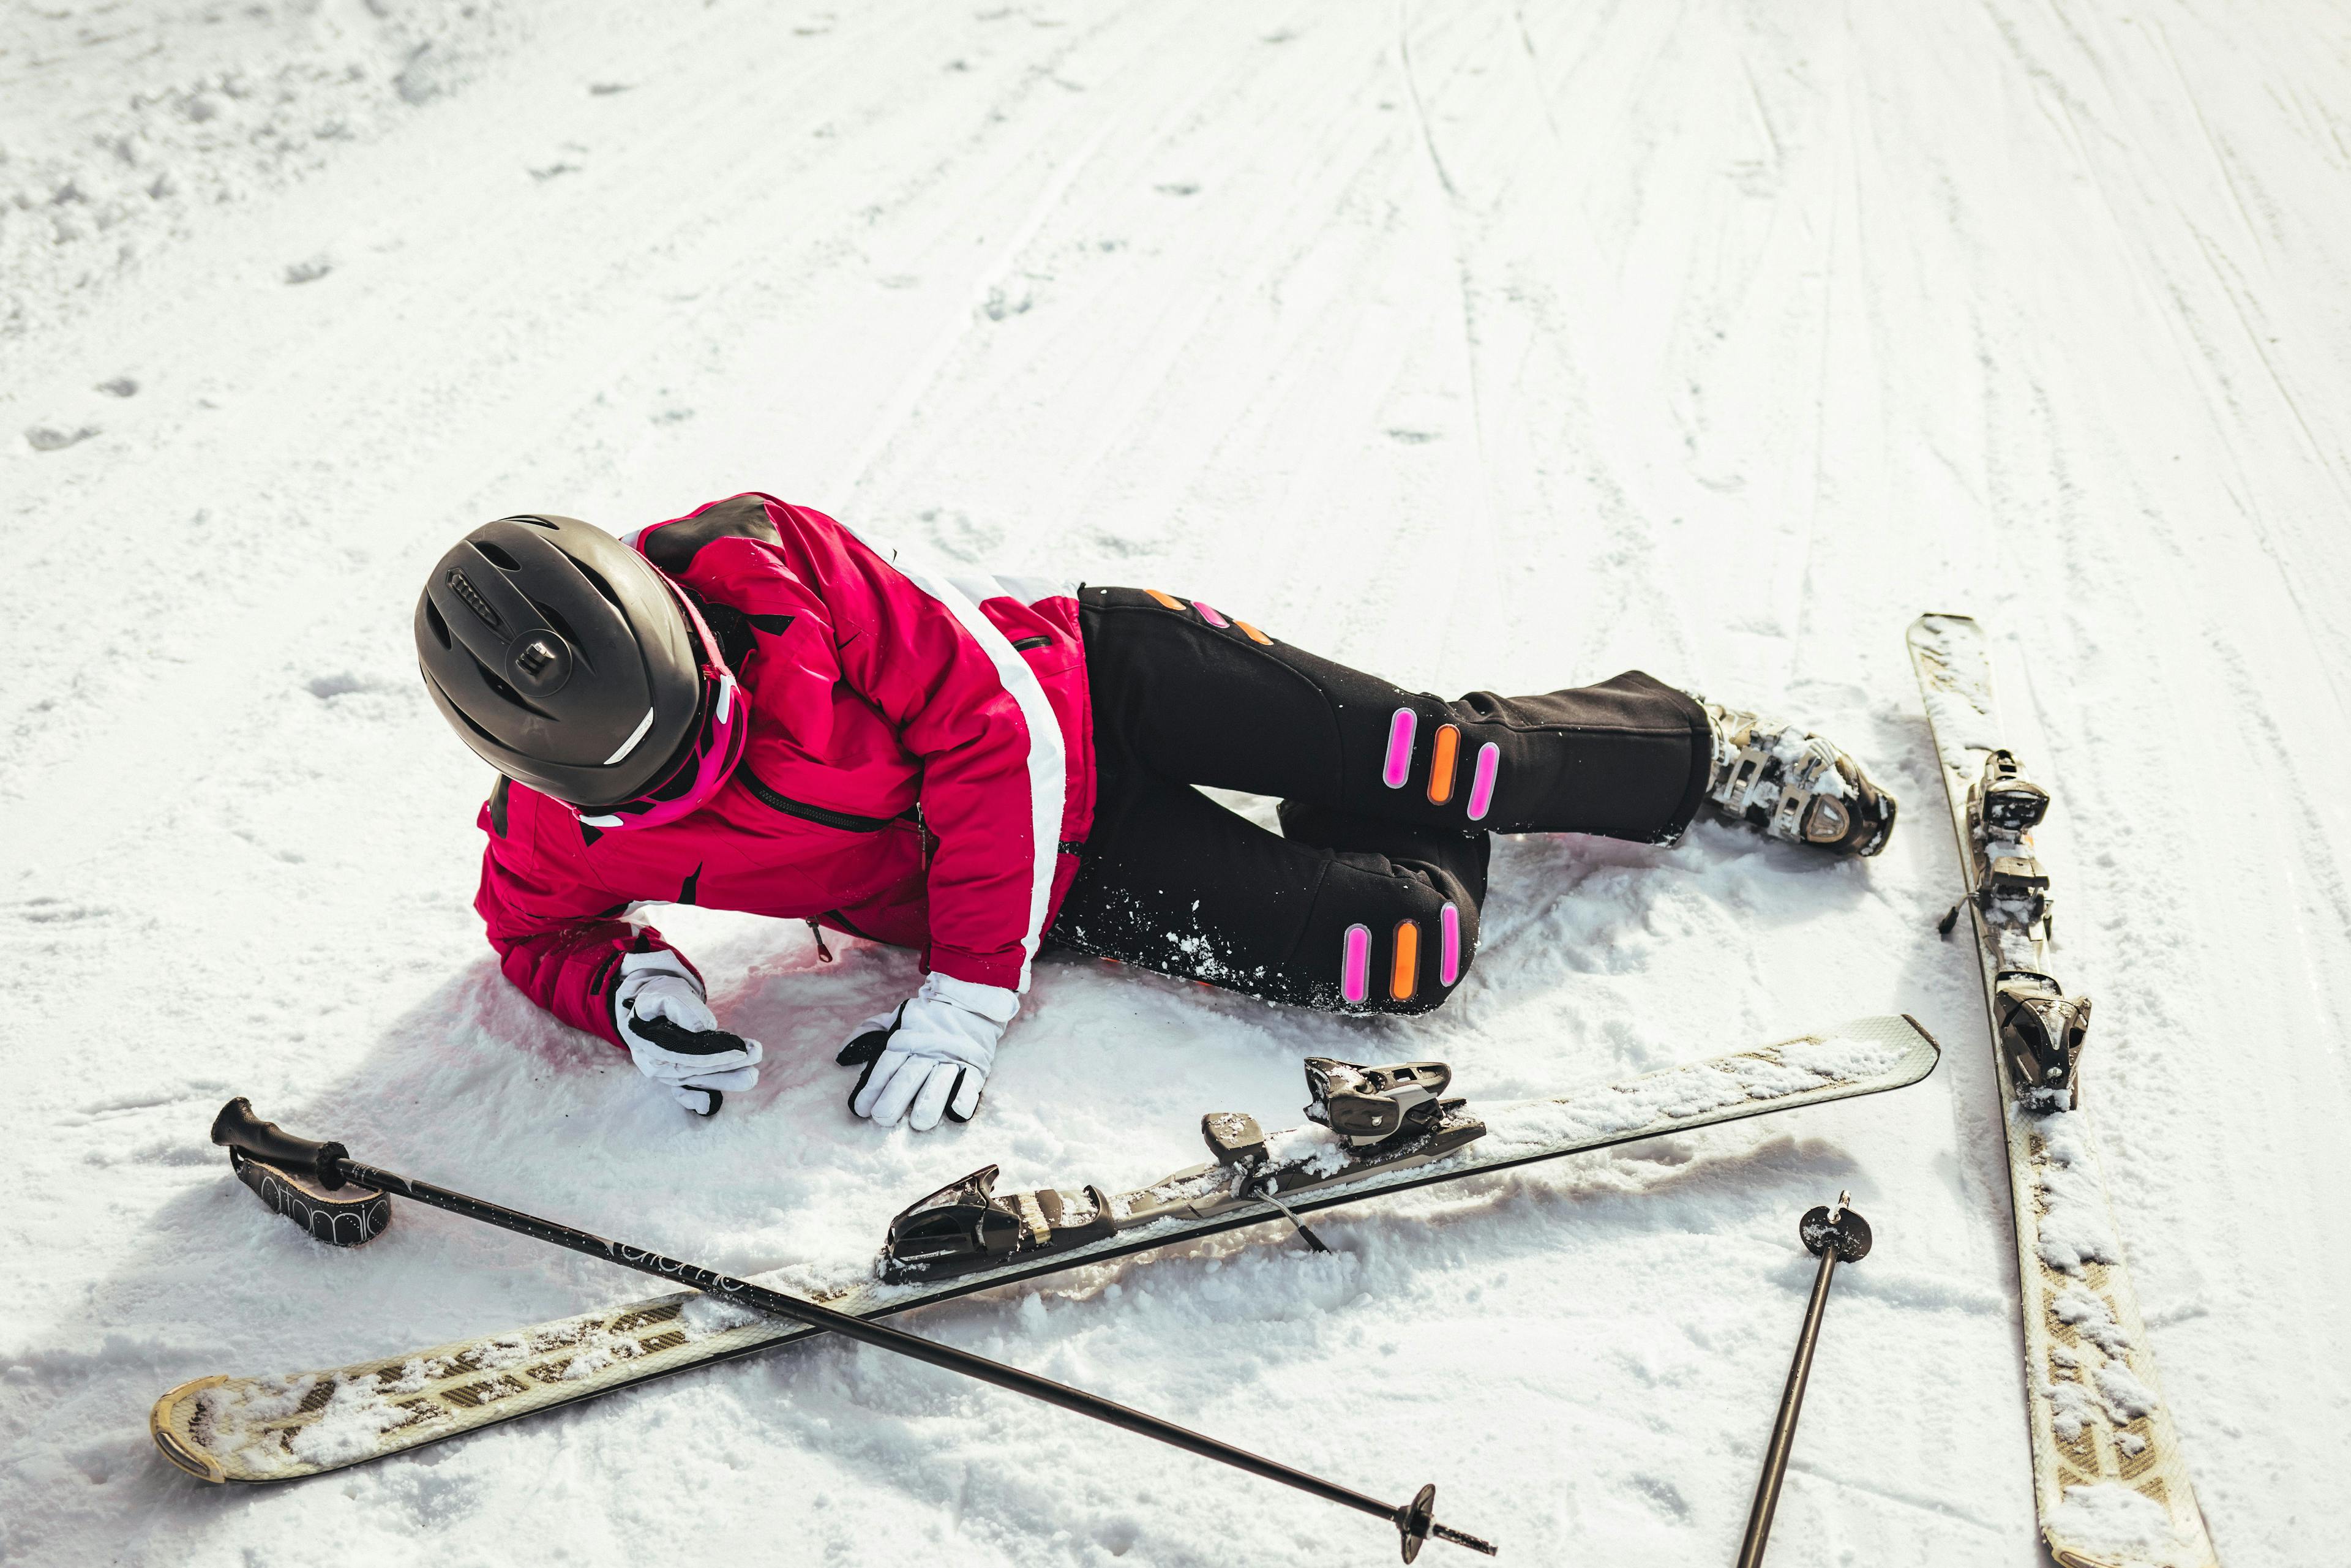 Related to Recreational Accidents: Liability in Sports and Outdoor Activities